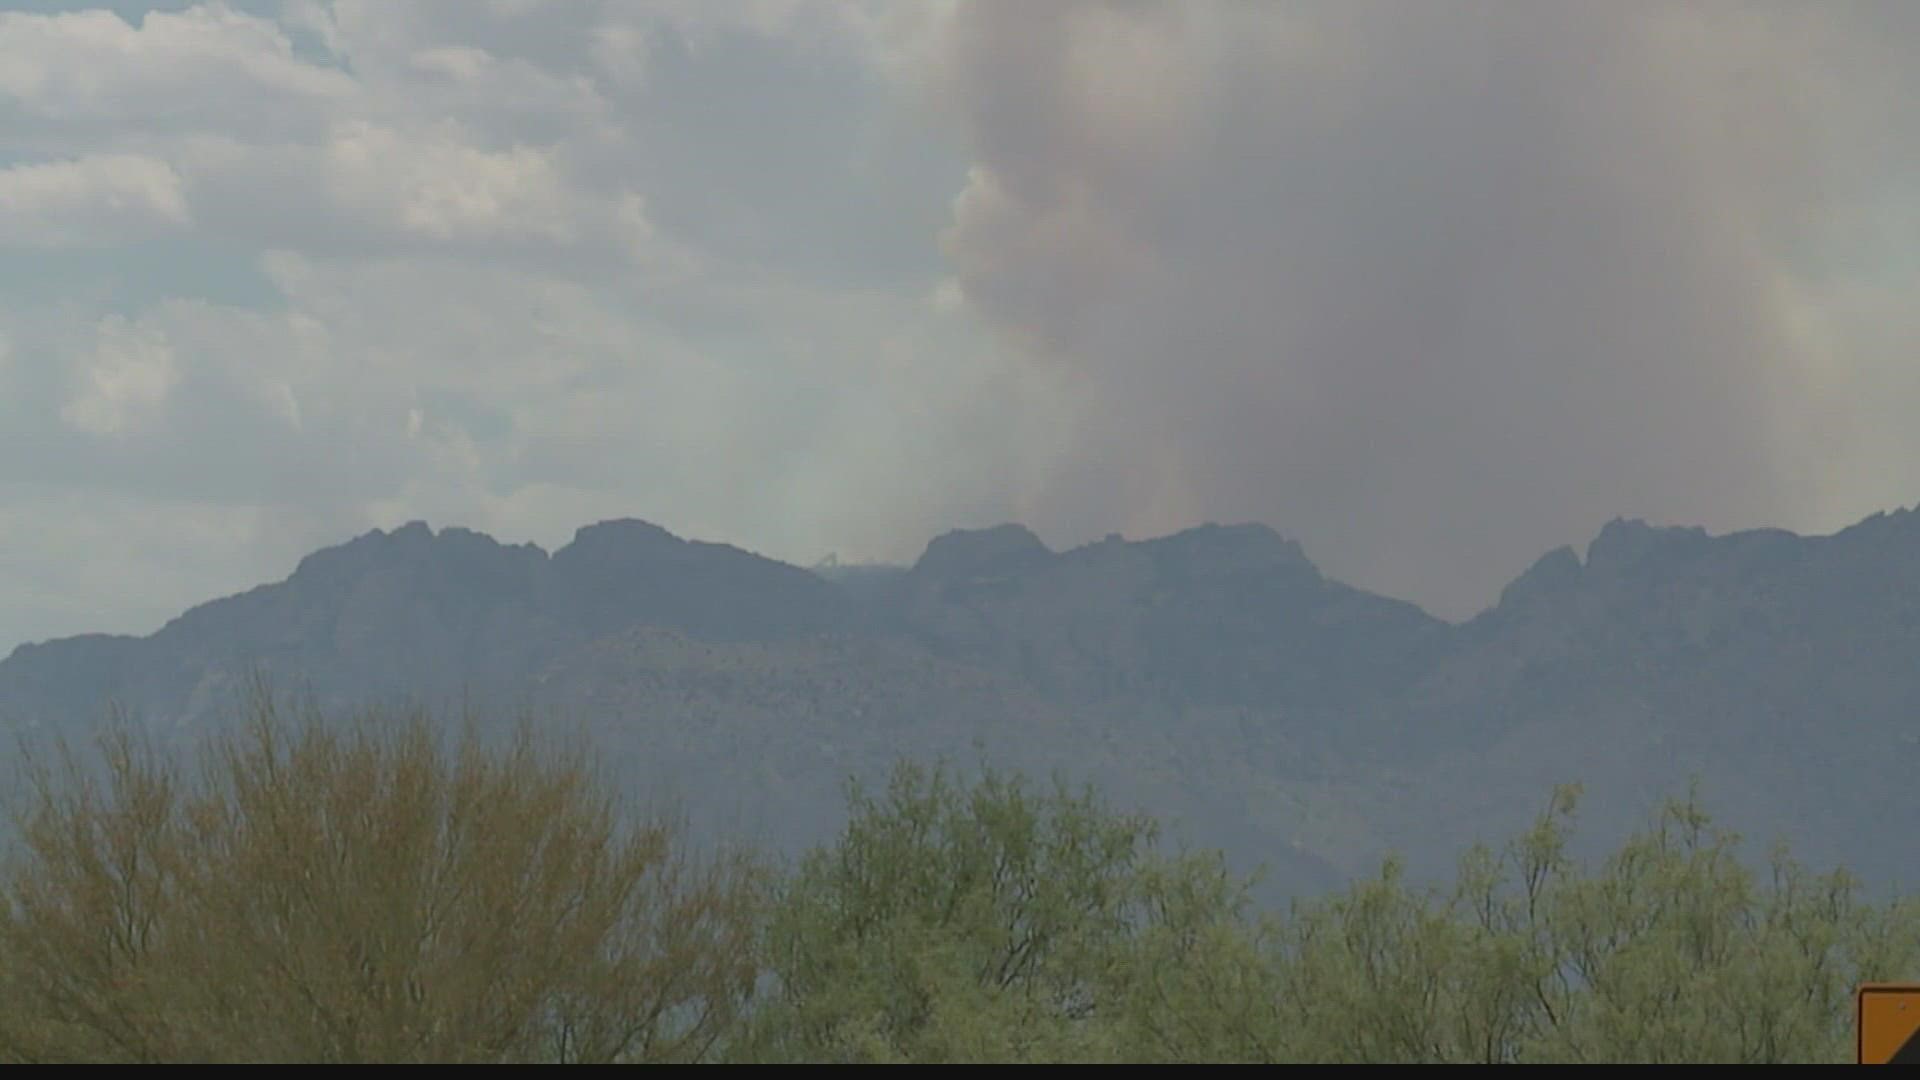 The Contreras Fire has burned more than 20,00 acres and is a real challenge for firefighters. The fire has become the number one priority for wildland fires.